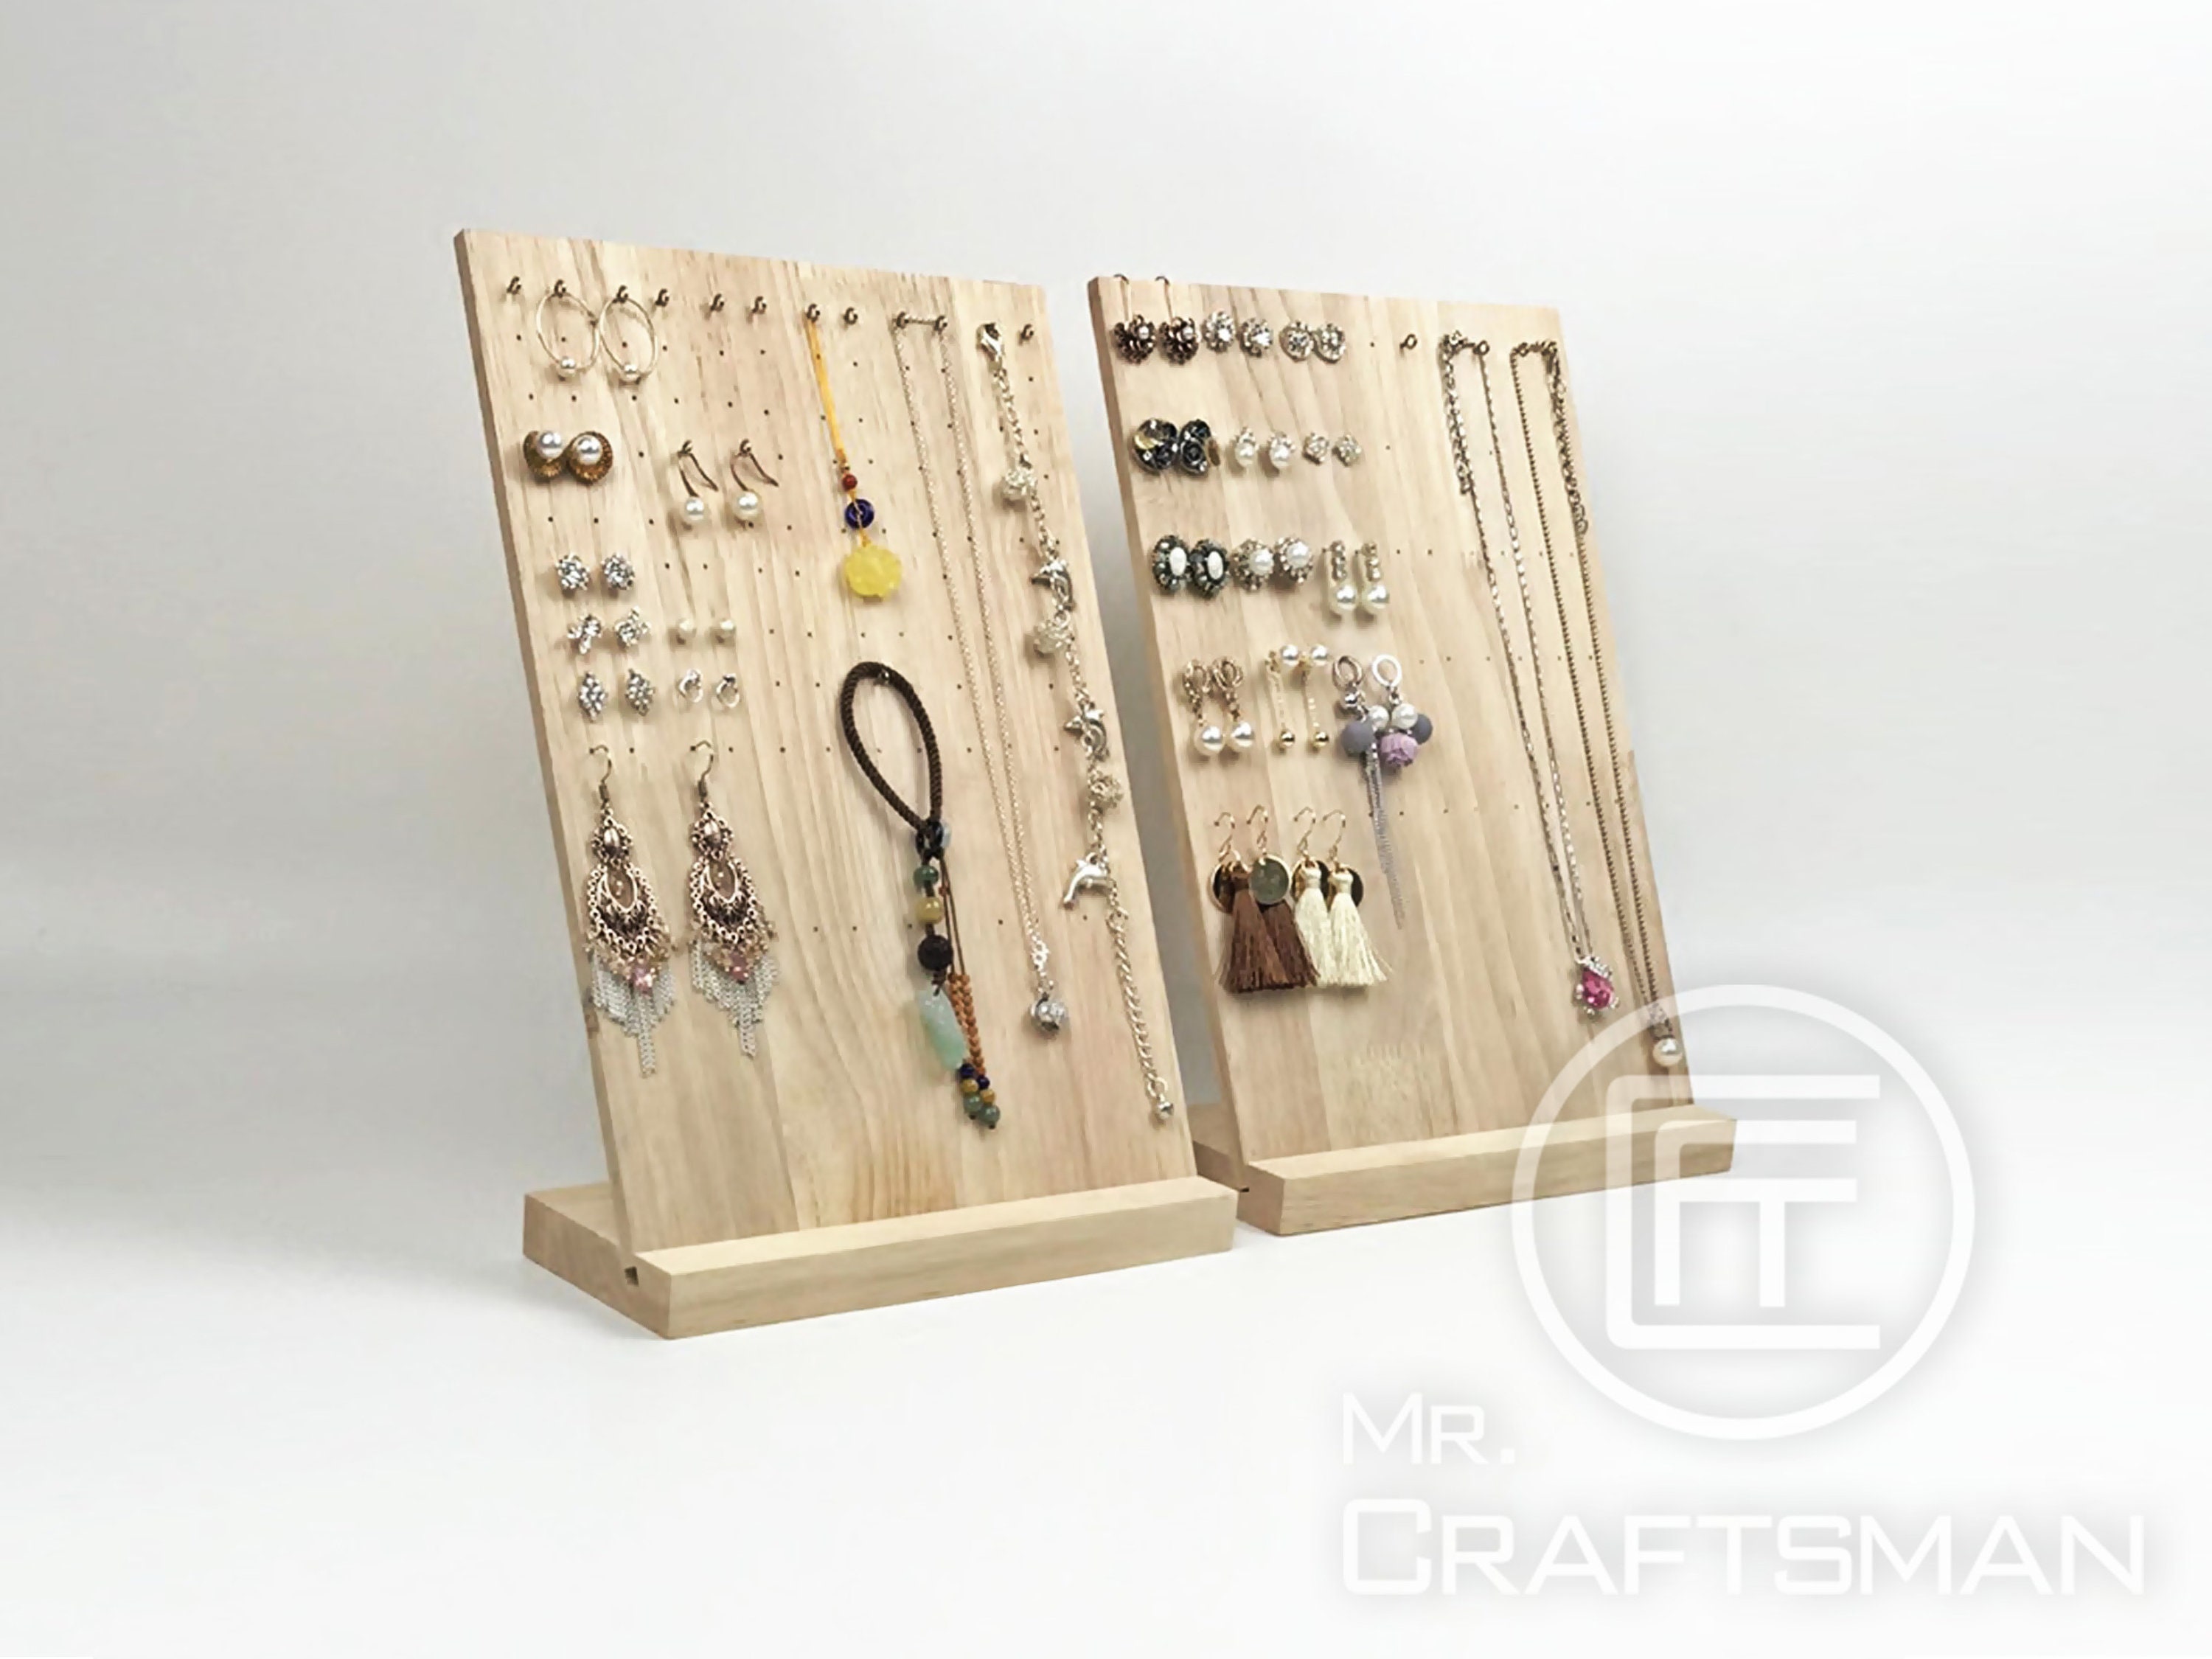 3 Inch Hooks for Jewelry Display